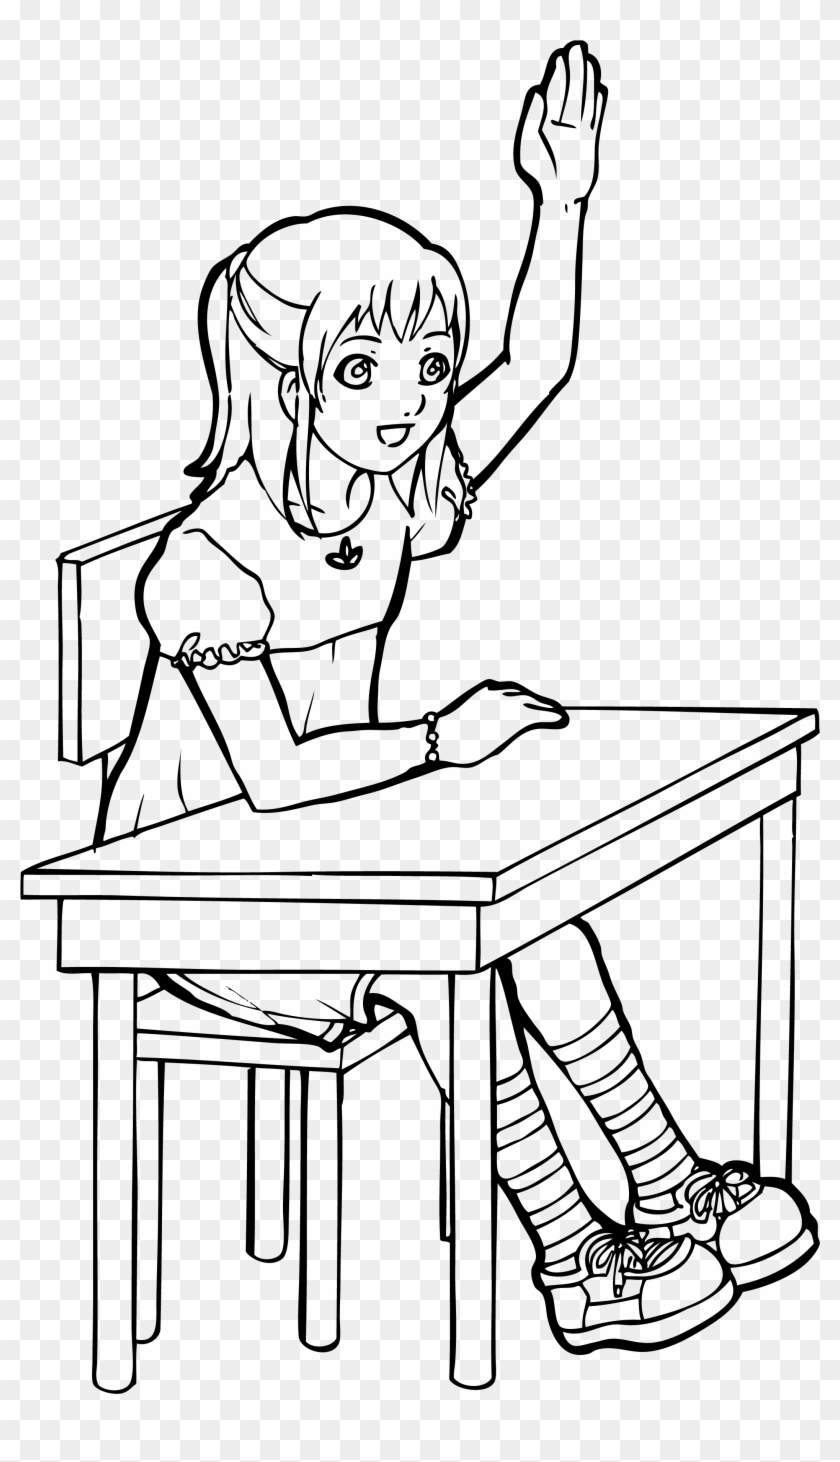 Student Raising Hand Clipart Black And White - Png Download